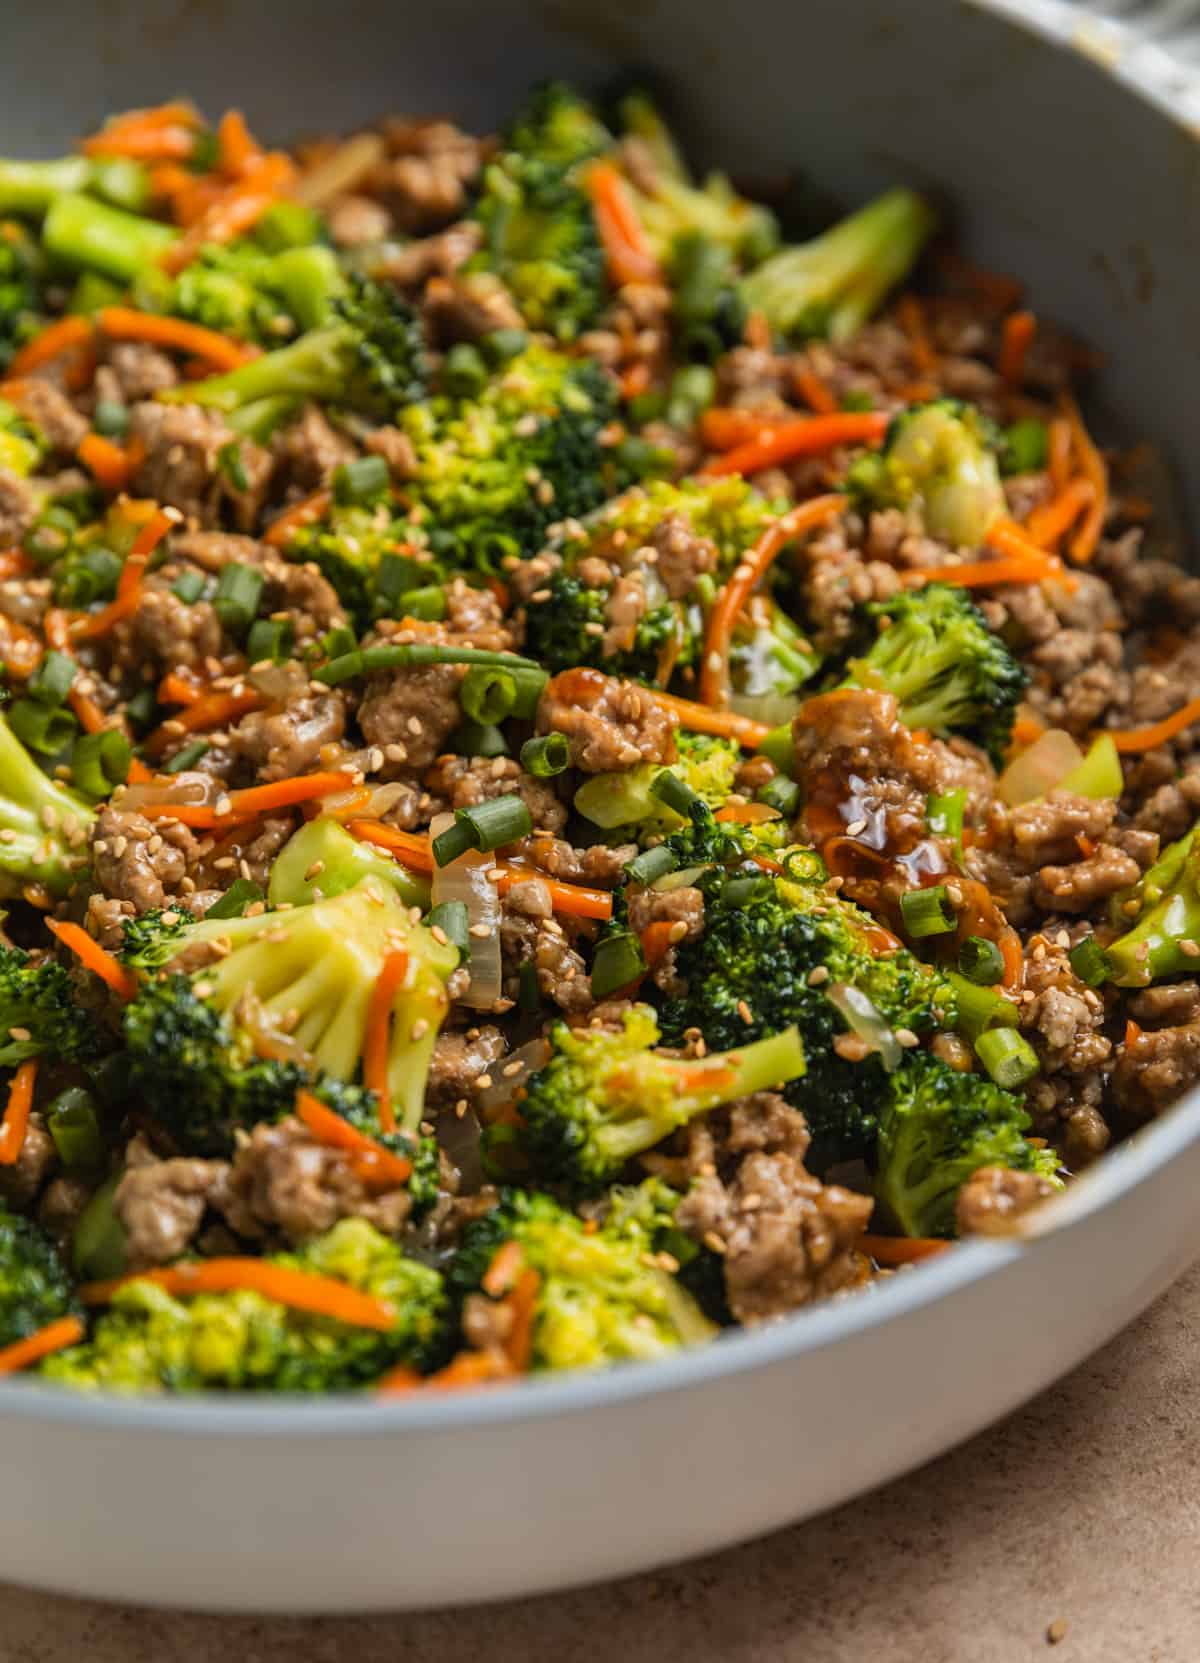 Stir fried ground turkey with carrots and broccoli in pan.